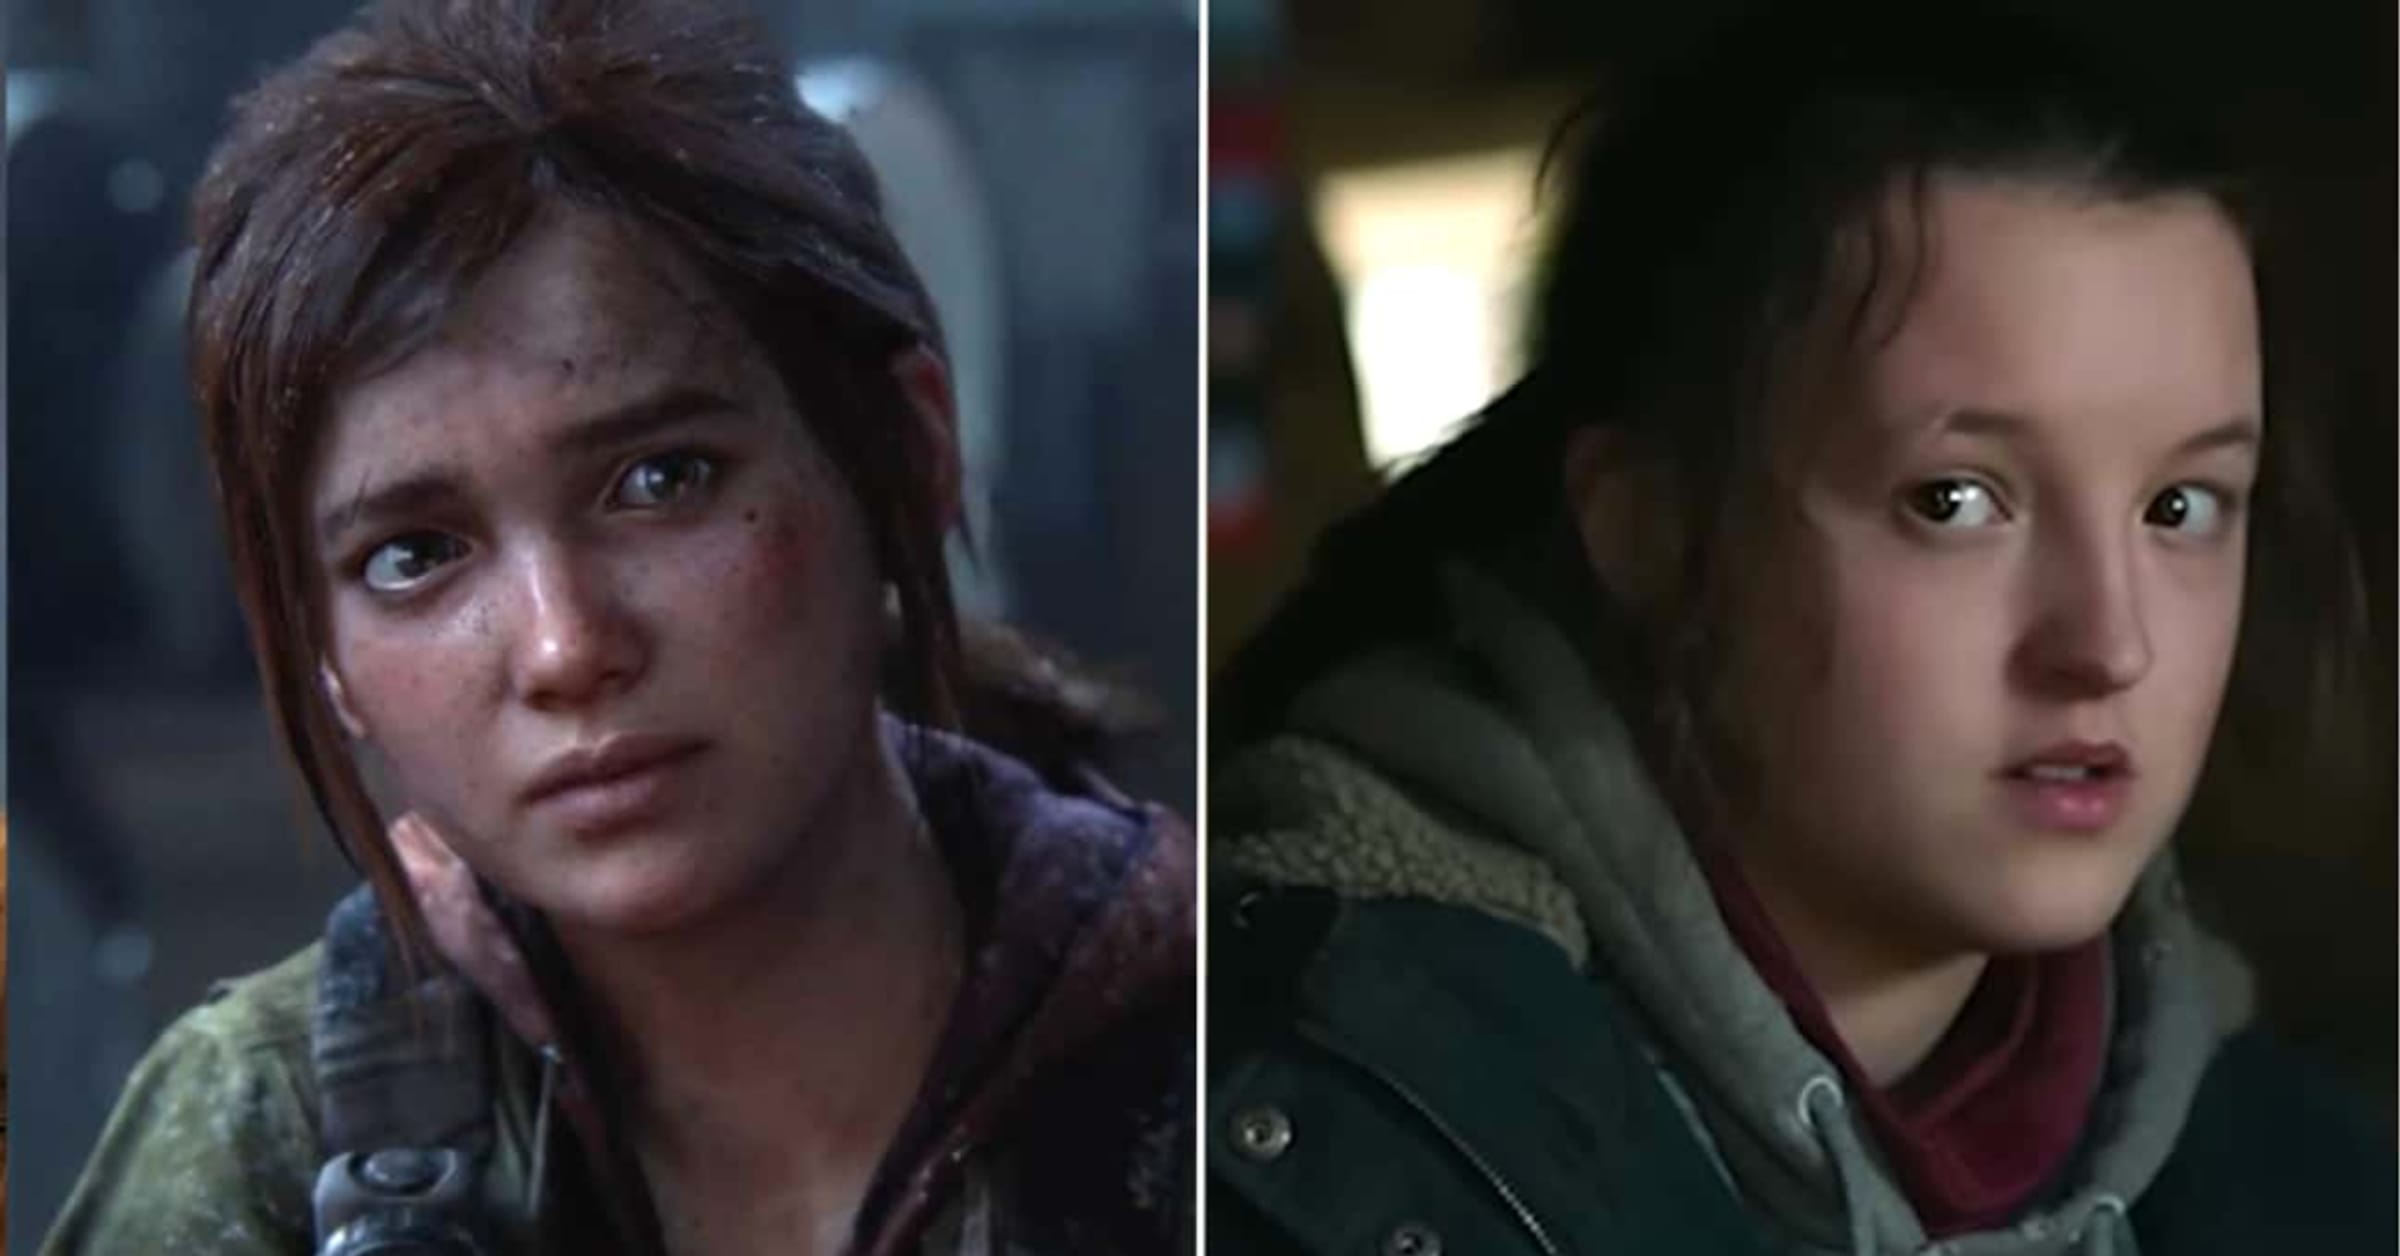 How The Last Of Us Cast Looks Compared To The Game Characters - IMDb